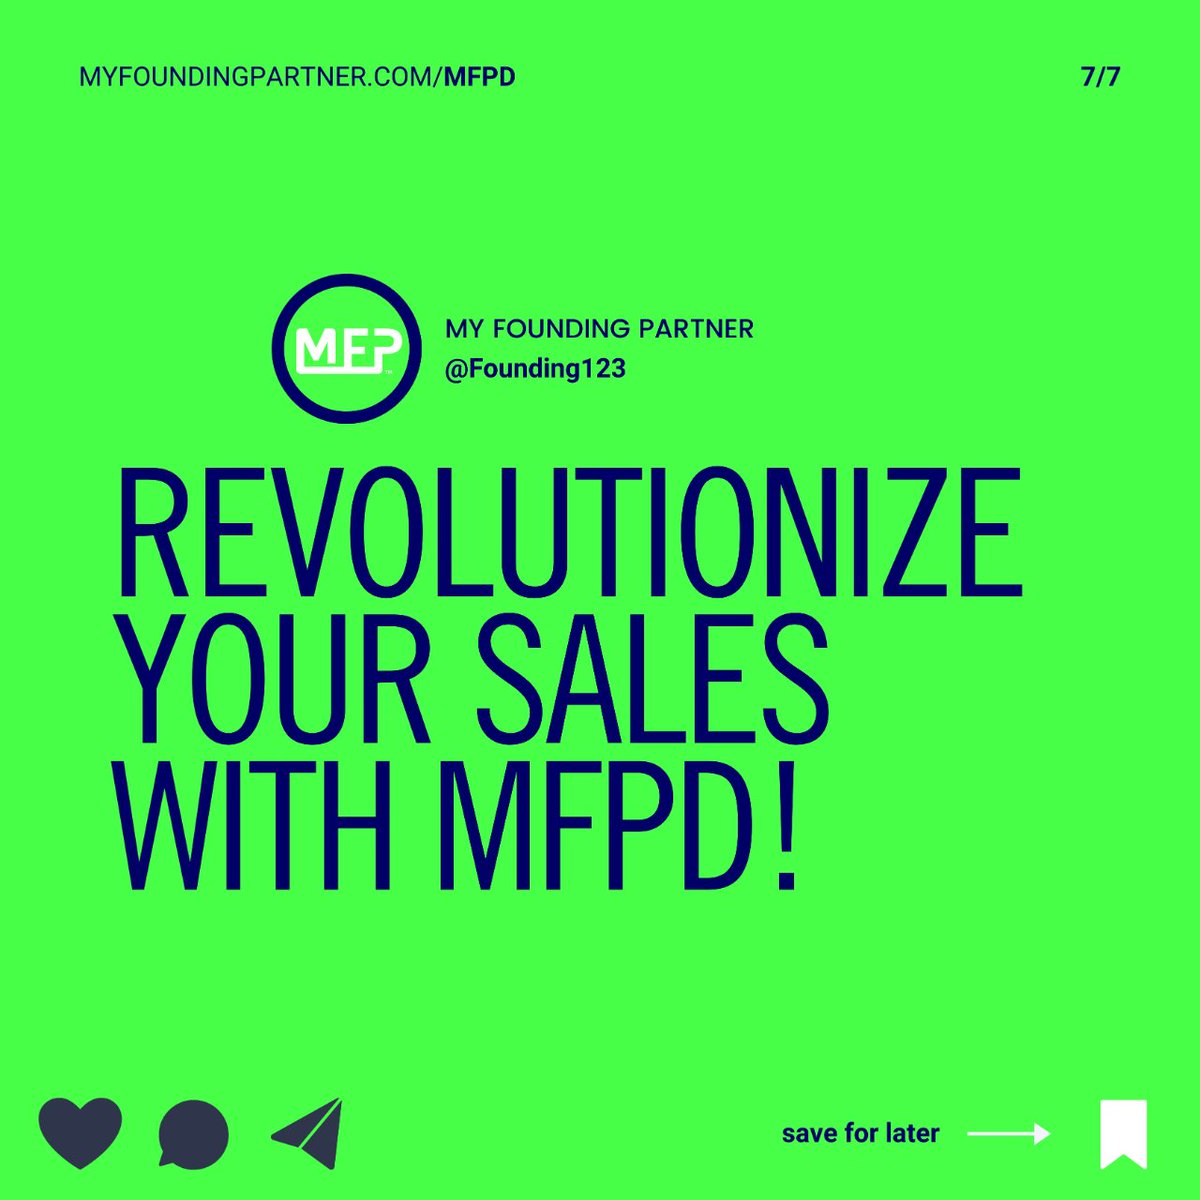 Boost sales across all channels with MFPD.

Leverage online stores, trade shows, and social media for growth. 🛒📈

#EcommerceGrowth #SalesChannels #OnlineStoreOptimization #MFP #BeAFounder